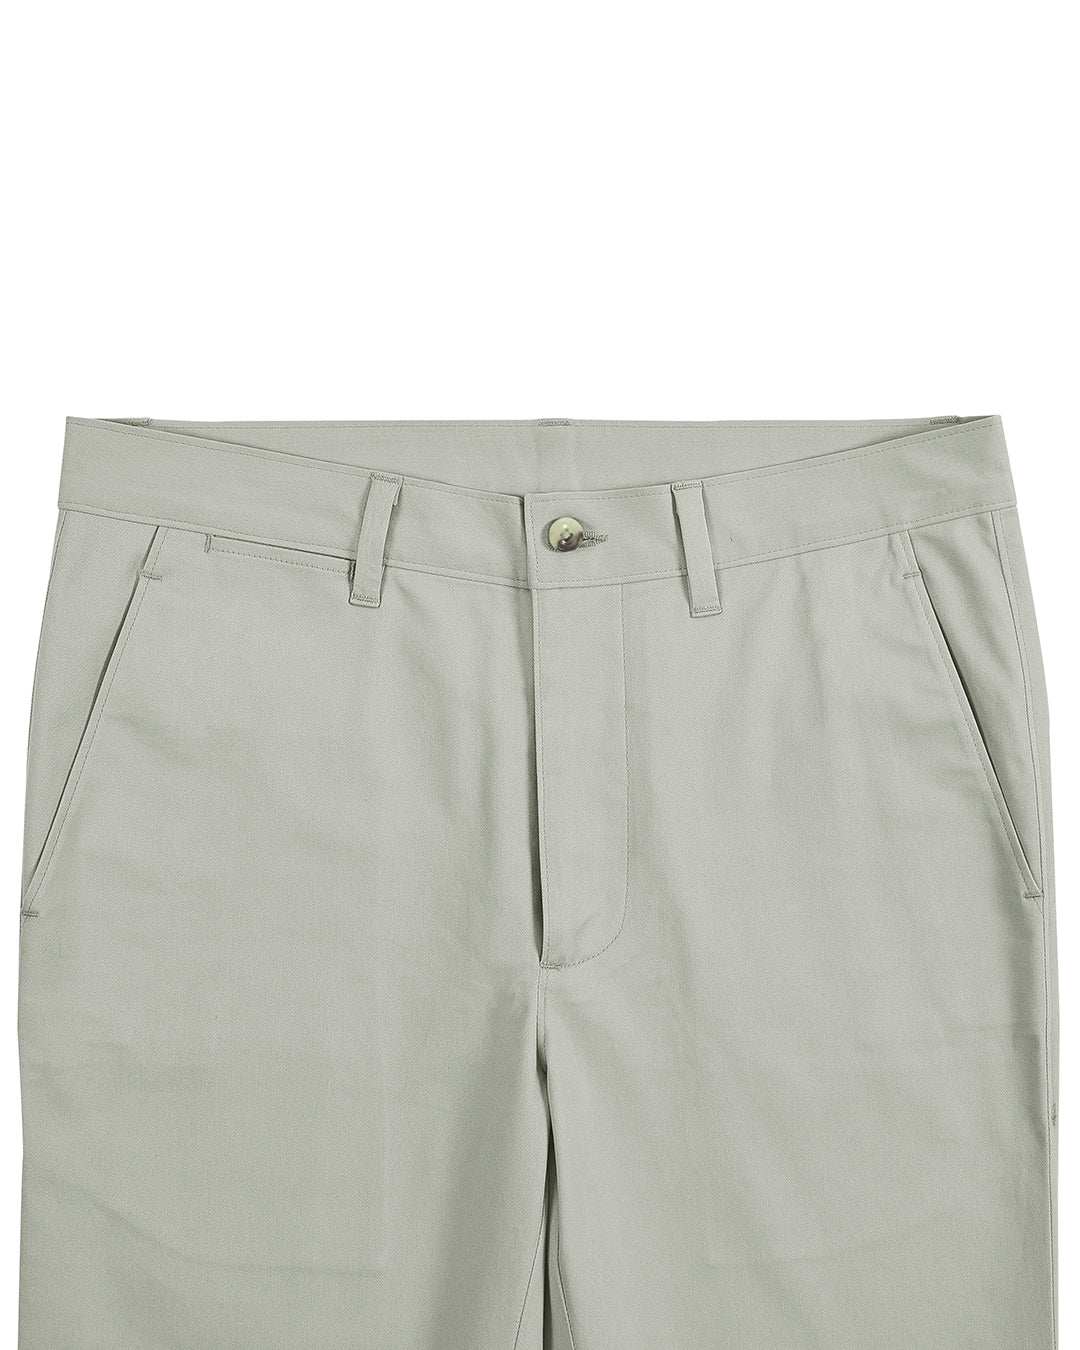 Front view of custom Genoa Chino pants for men by Luxire in pale green